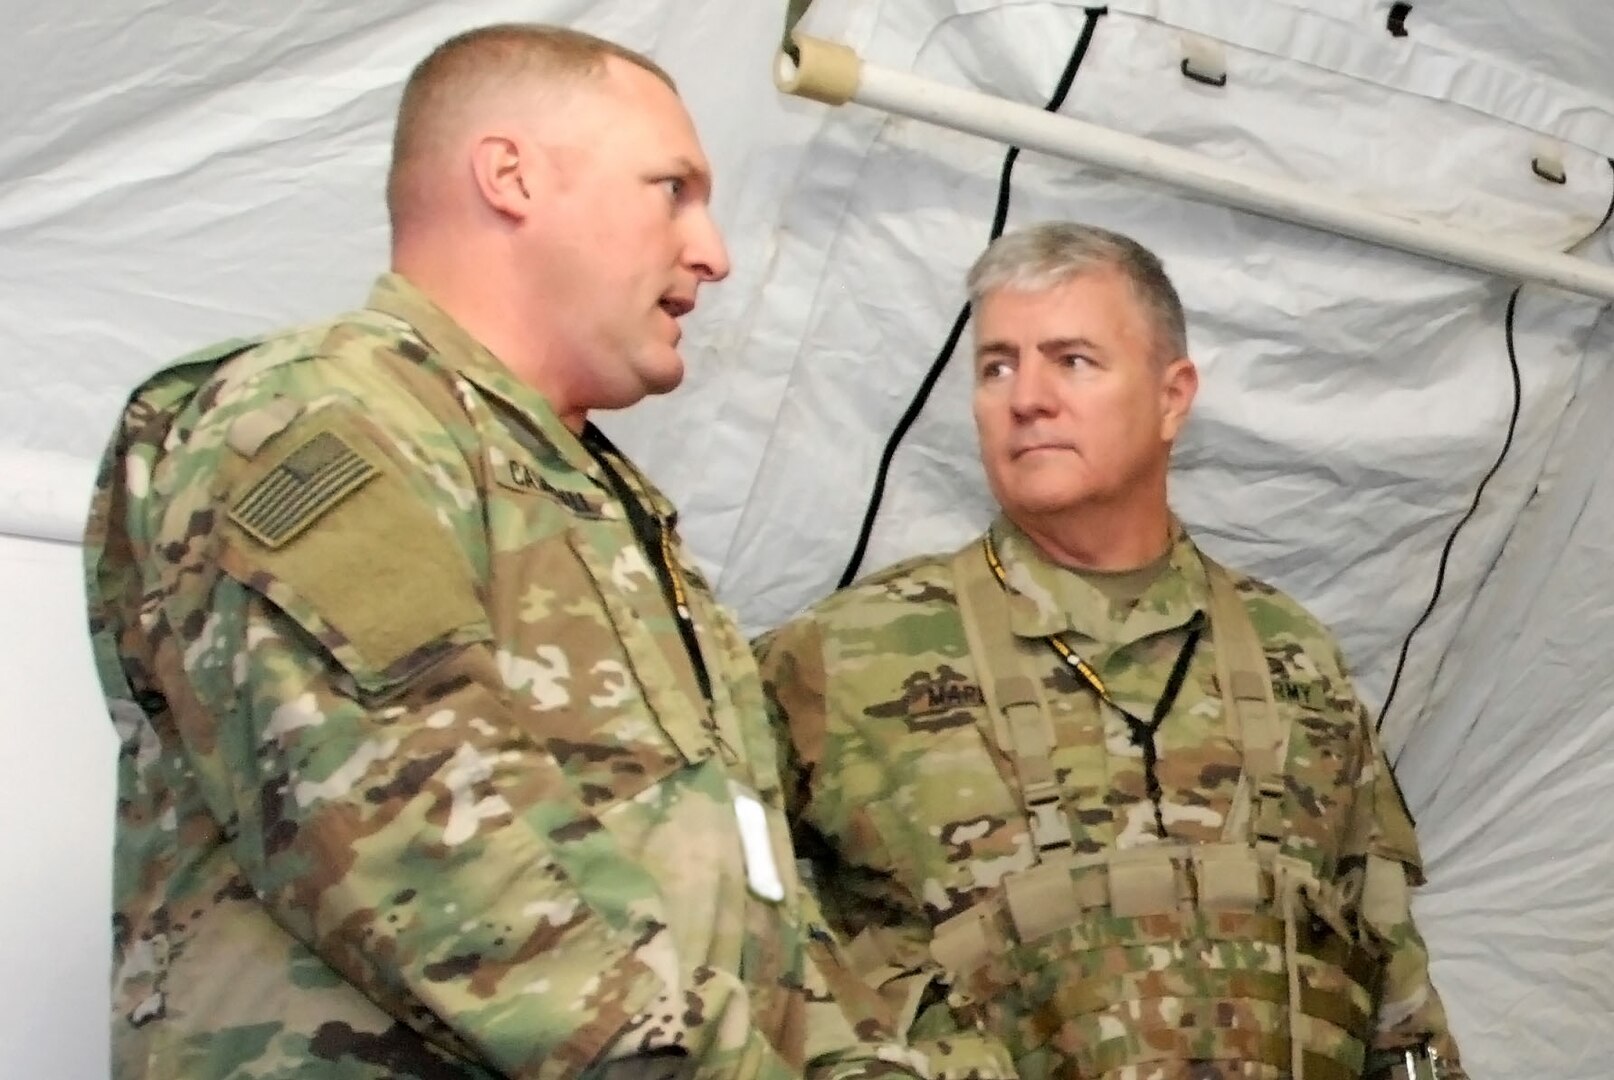 South Dakota Army National Guard Adjutant General Maj. Gen. Jeffrey Marlette, right, talks with Lt. Col. Jason Campbell, command judge advocate with the 196th Maneuver Enhancement Brigade, at a simulated wartime exercise Sept. 25-Oct. 12 in Joint Base Lewis-McChord, Wash.